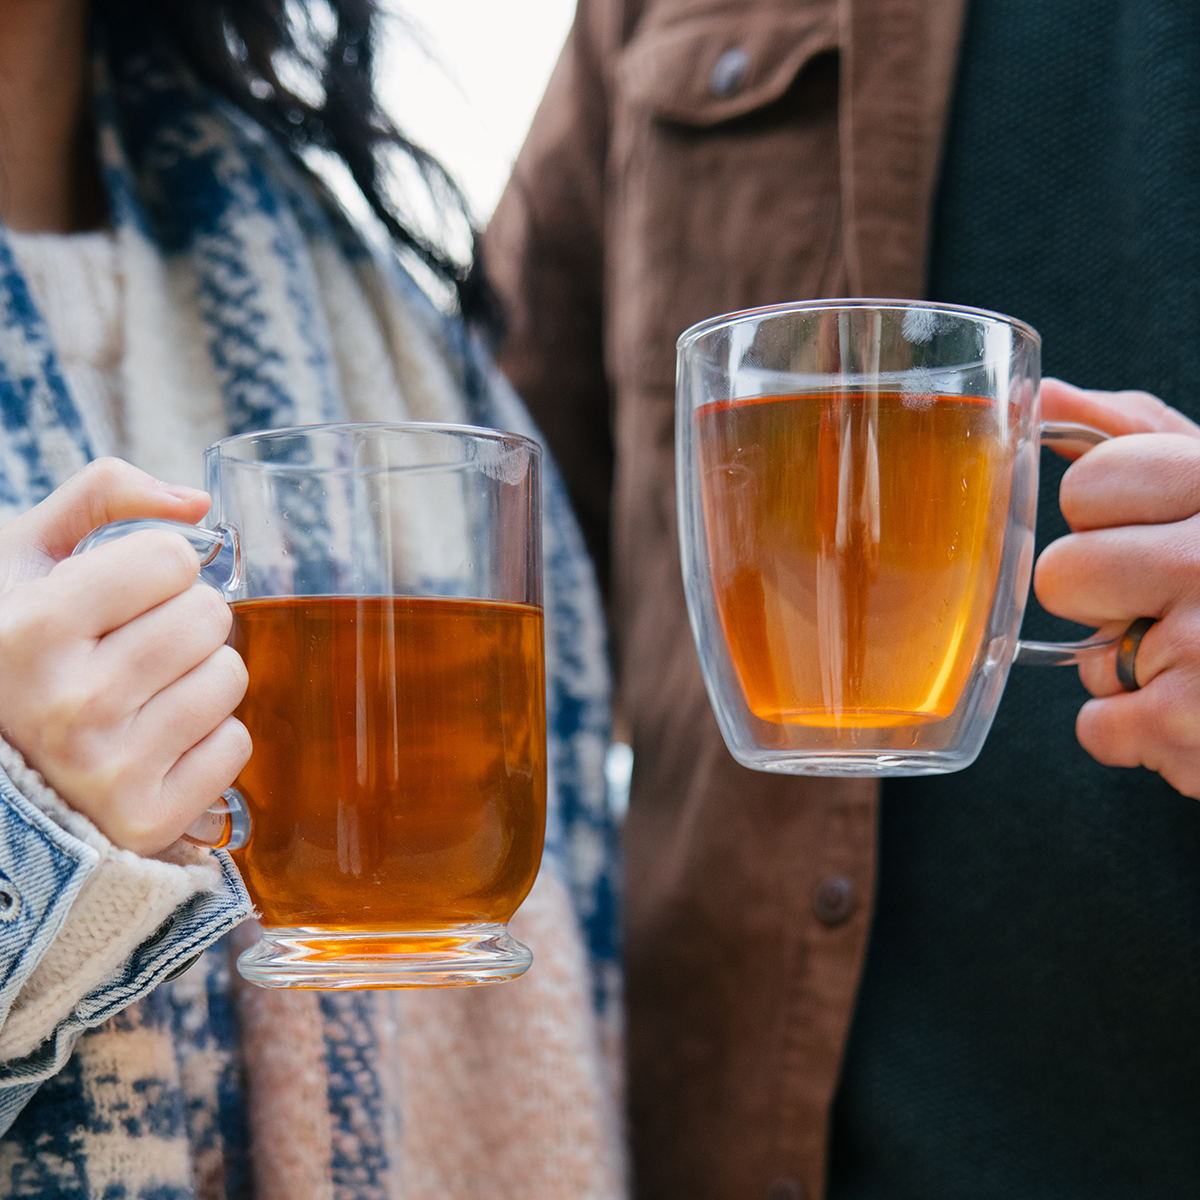 Is tea really that good for you?